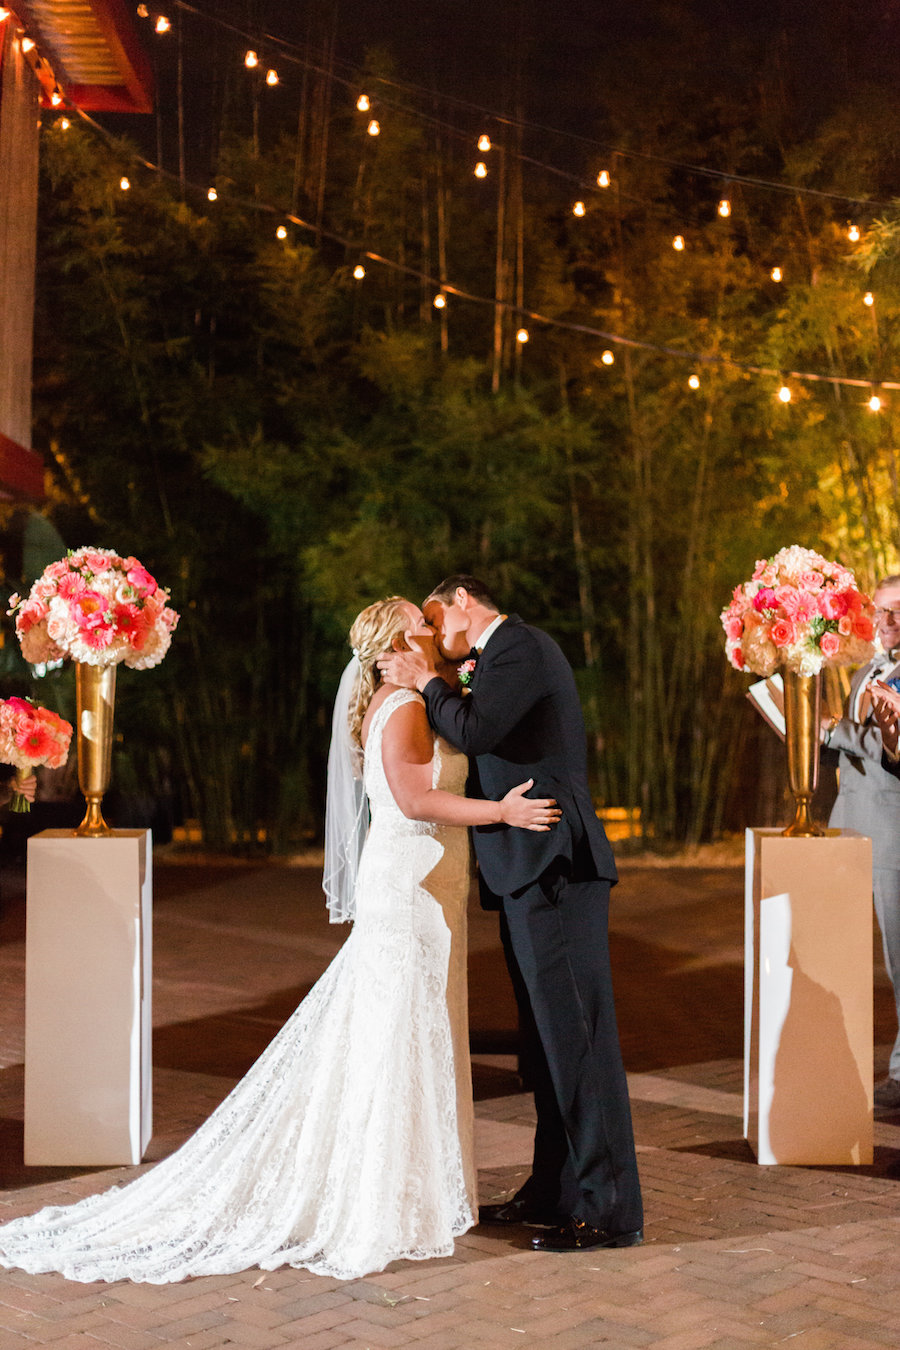 Outdoor, St Pete Wedding Ceremony, Bride and Groom First Kiss Portrait | St. Pete Wedding and Event Space NOVA 535